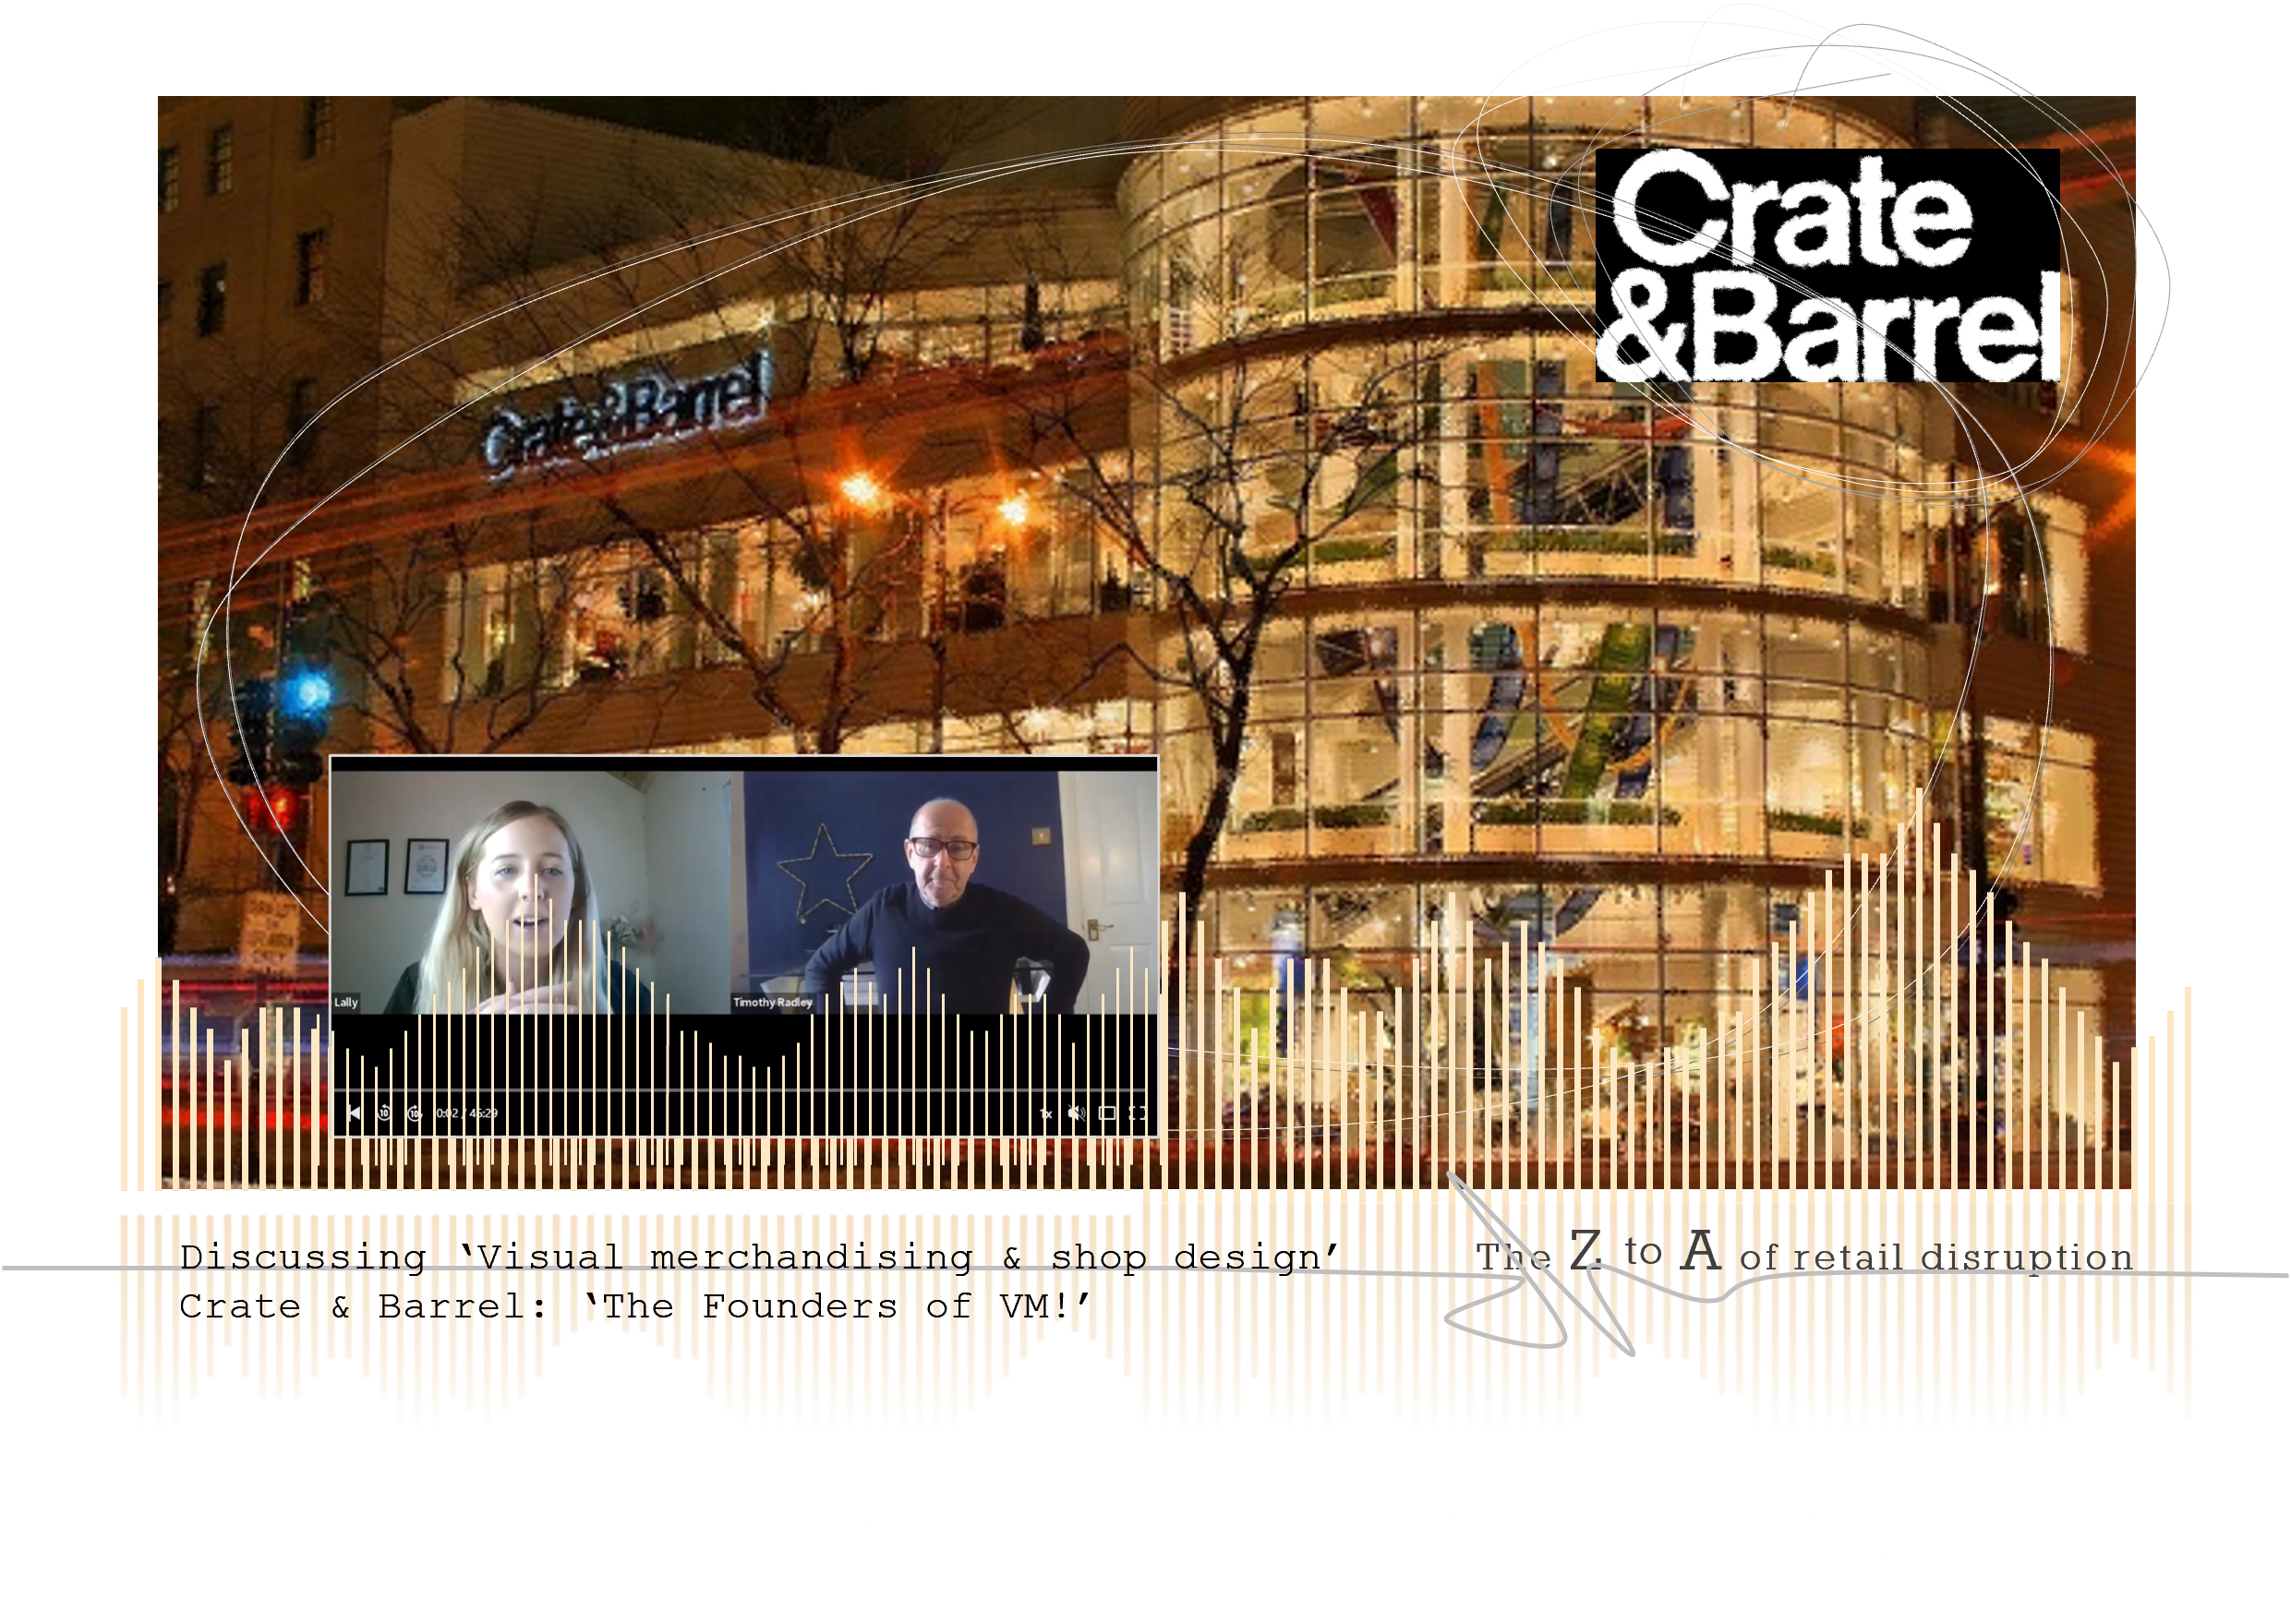 Discussing Visual Merchandising & Shop Design: Crate & Barrel – ‘The founders of modern VM?’